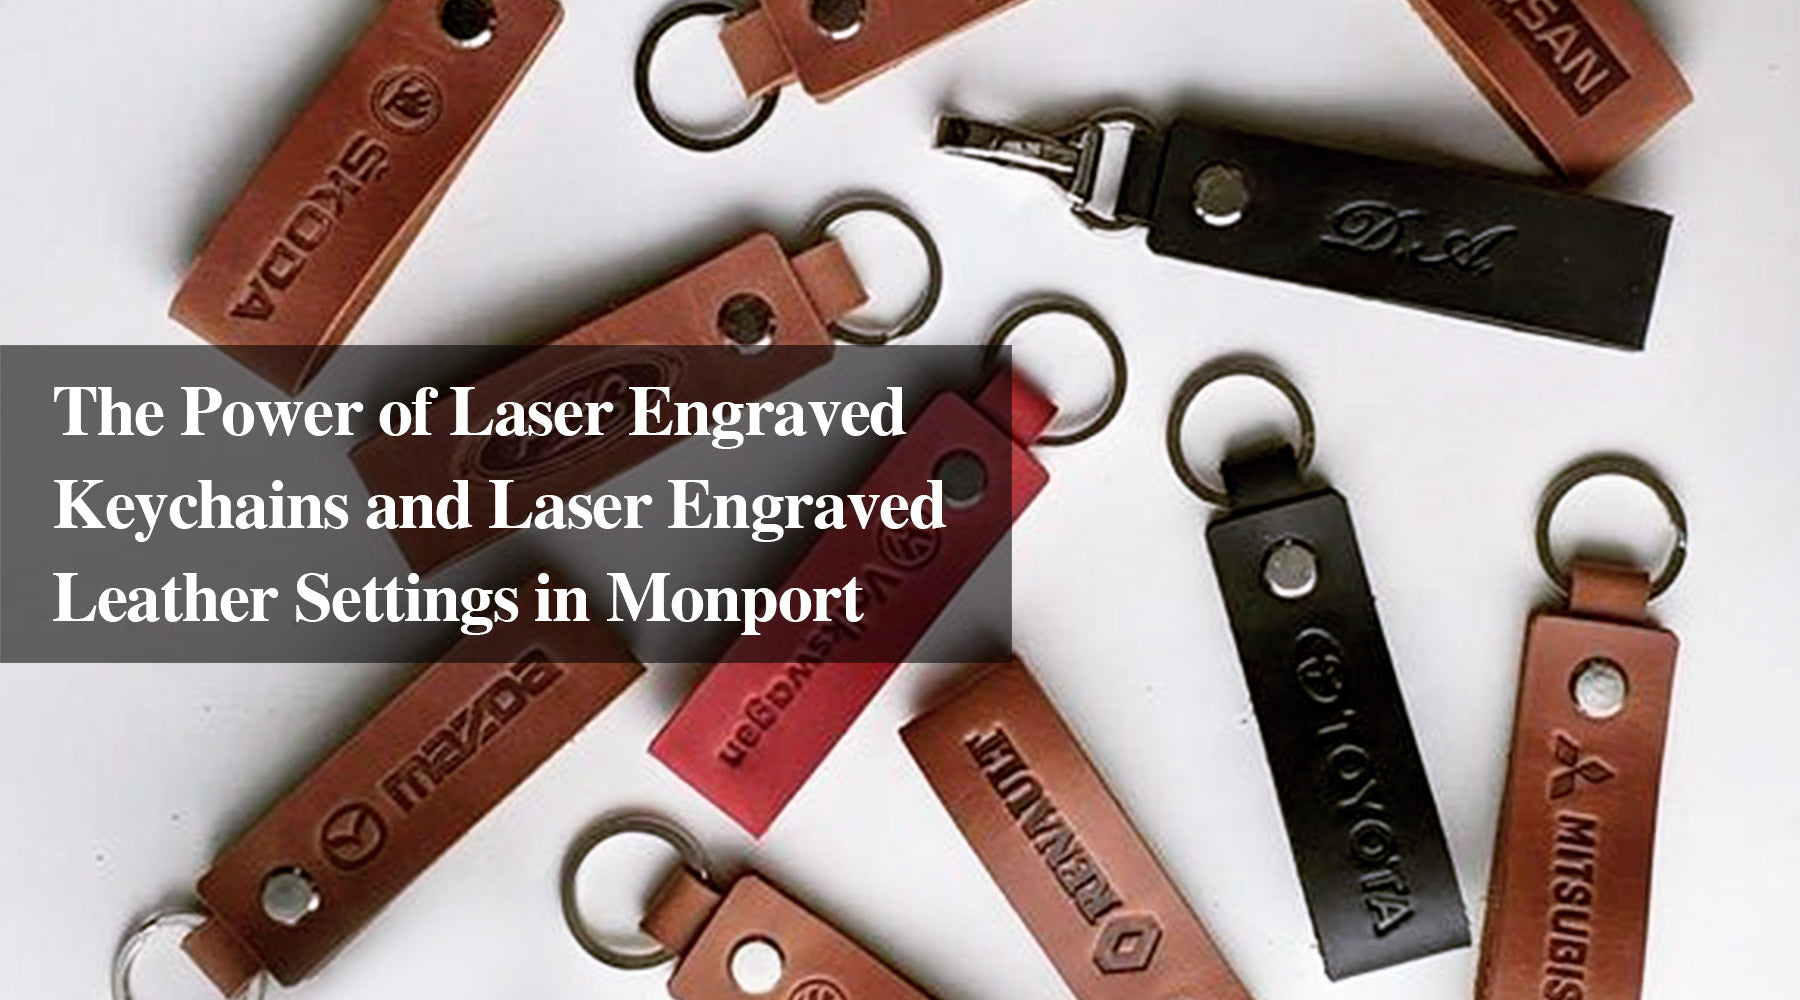 The Power of Laser Engraved Keychains and Laser Engraved Leather Settings in Monport